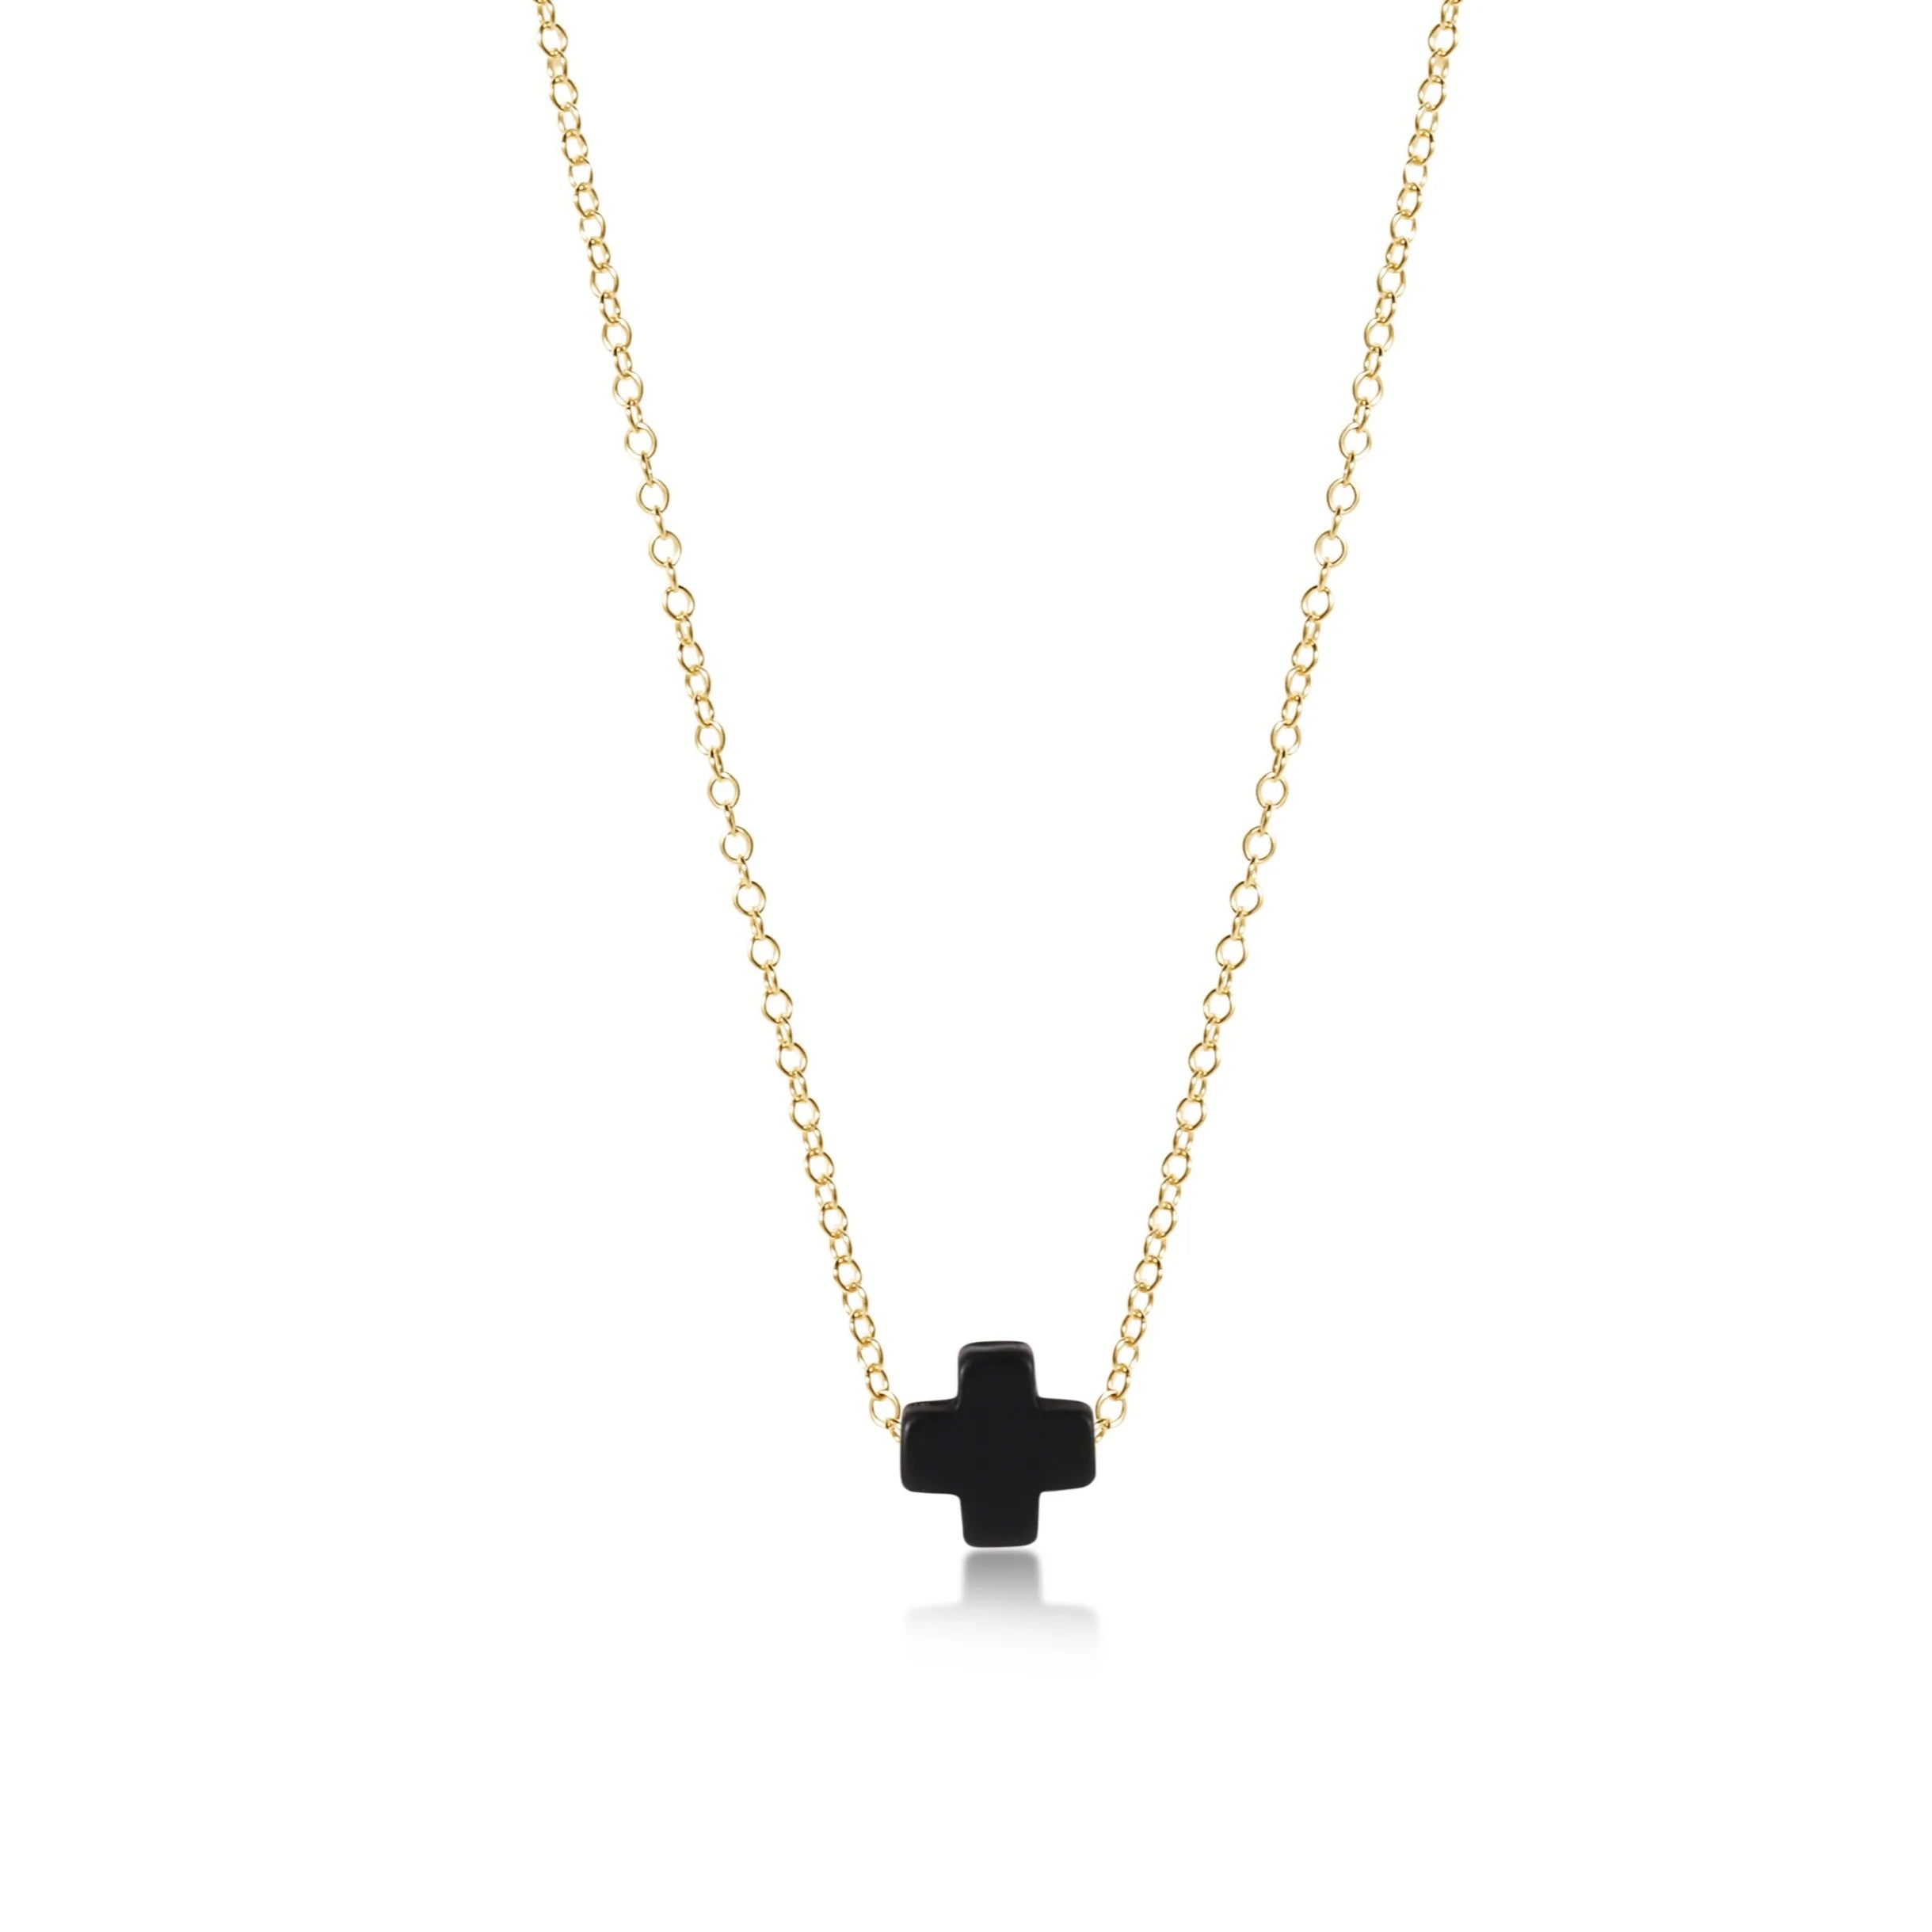 Onyx Cross on Gold Chain Necklace